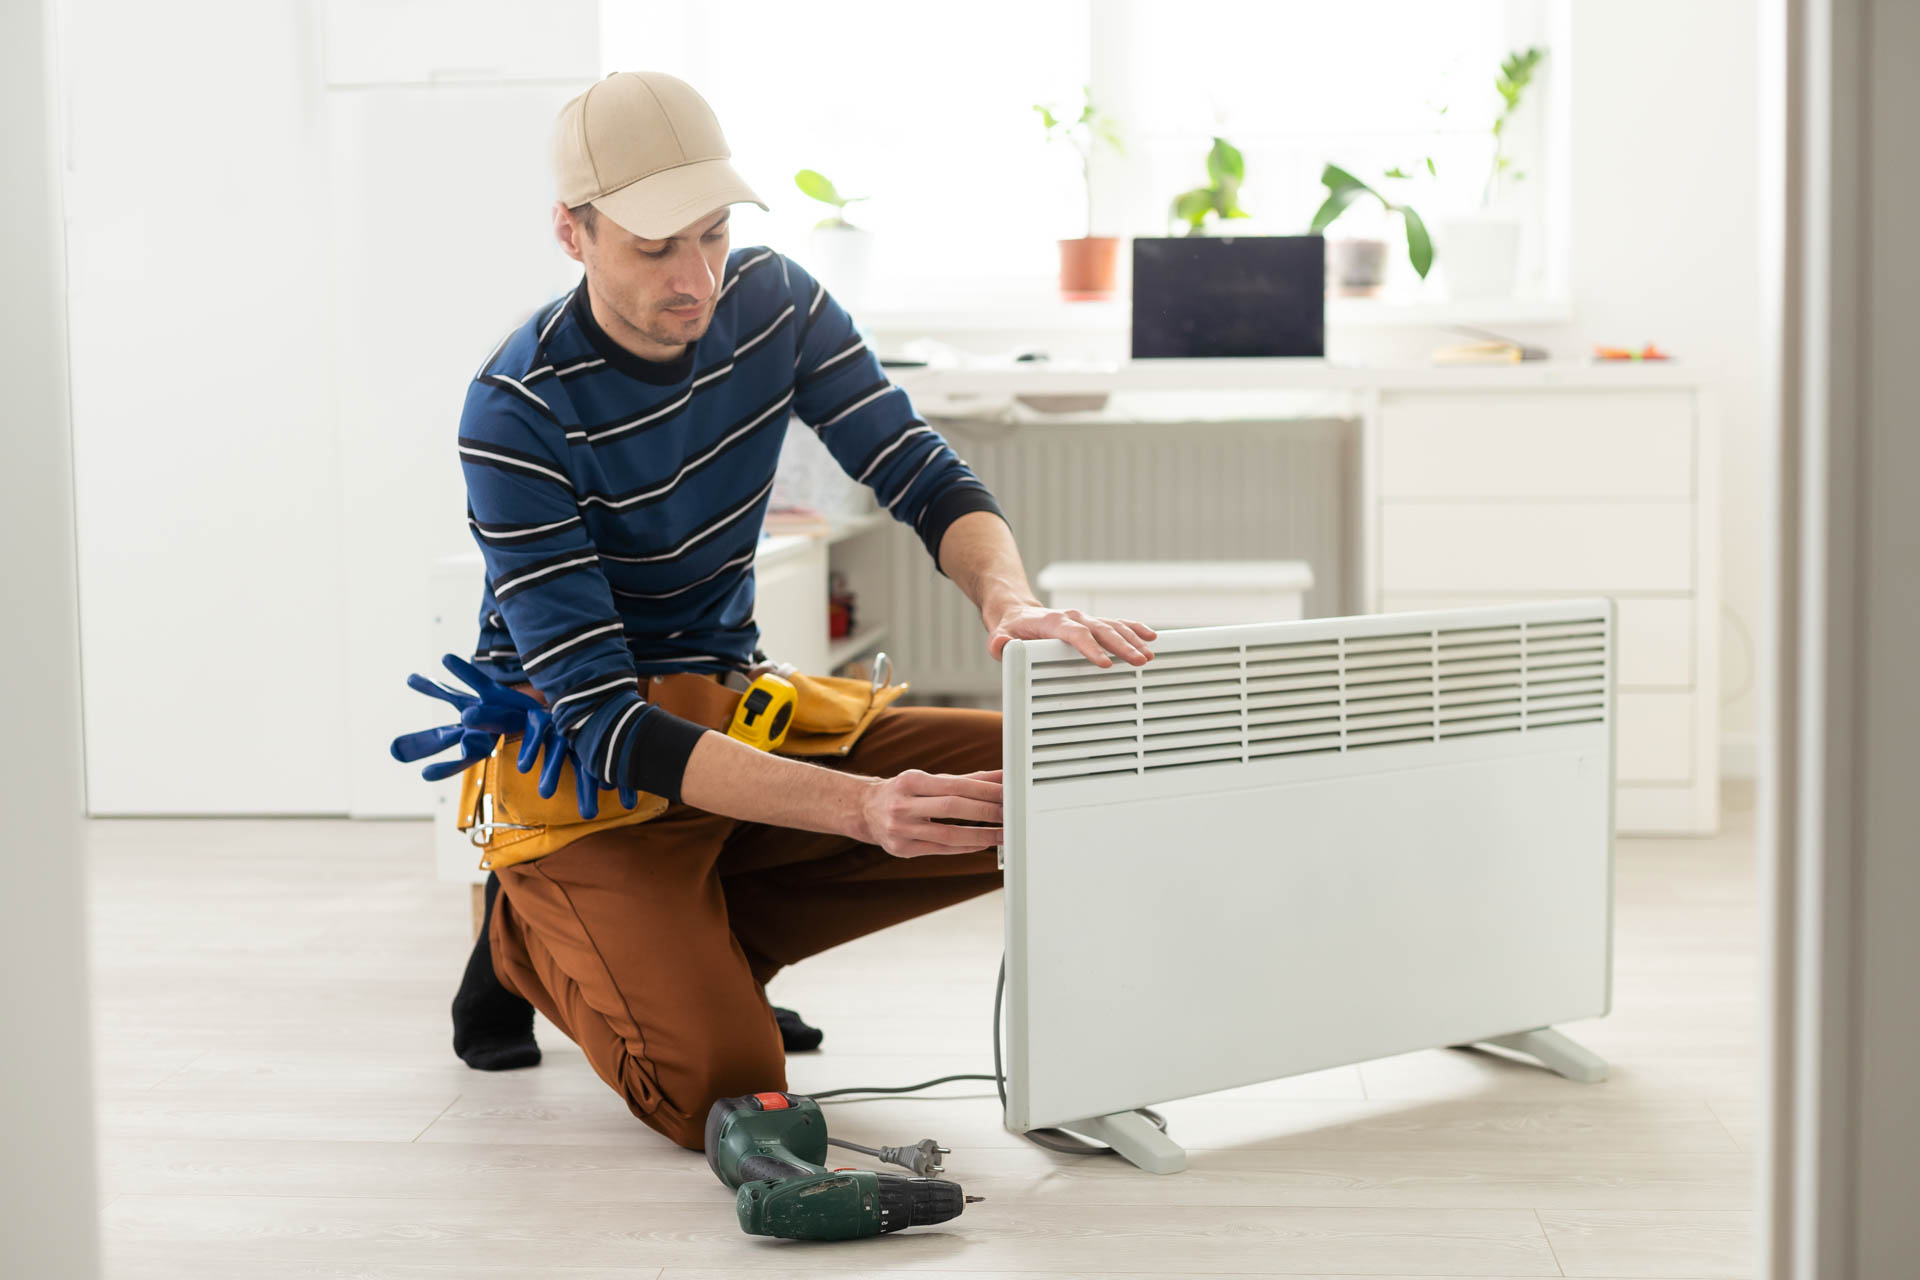 A repairman in a cap and tool belt is kneeling and working on a white portable radiator in a bright room.